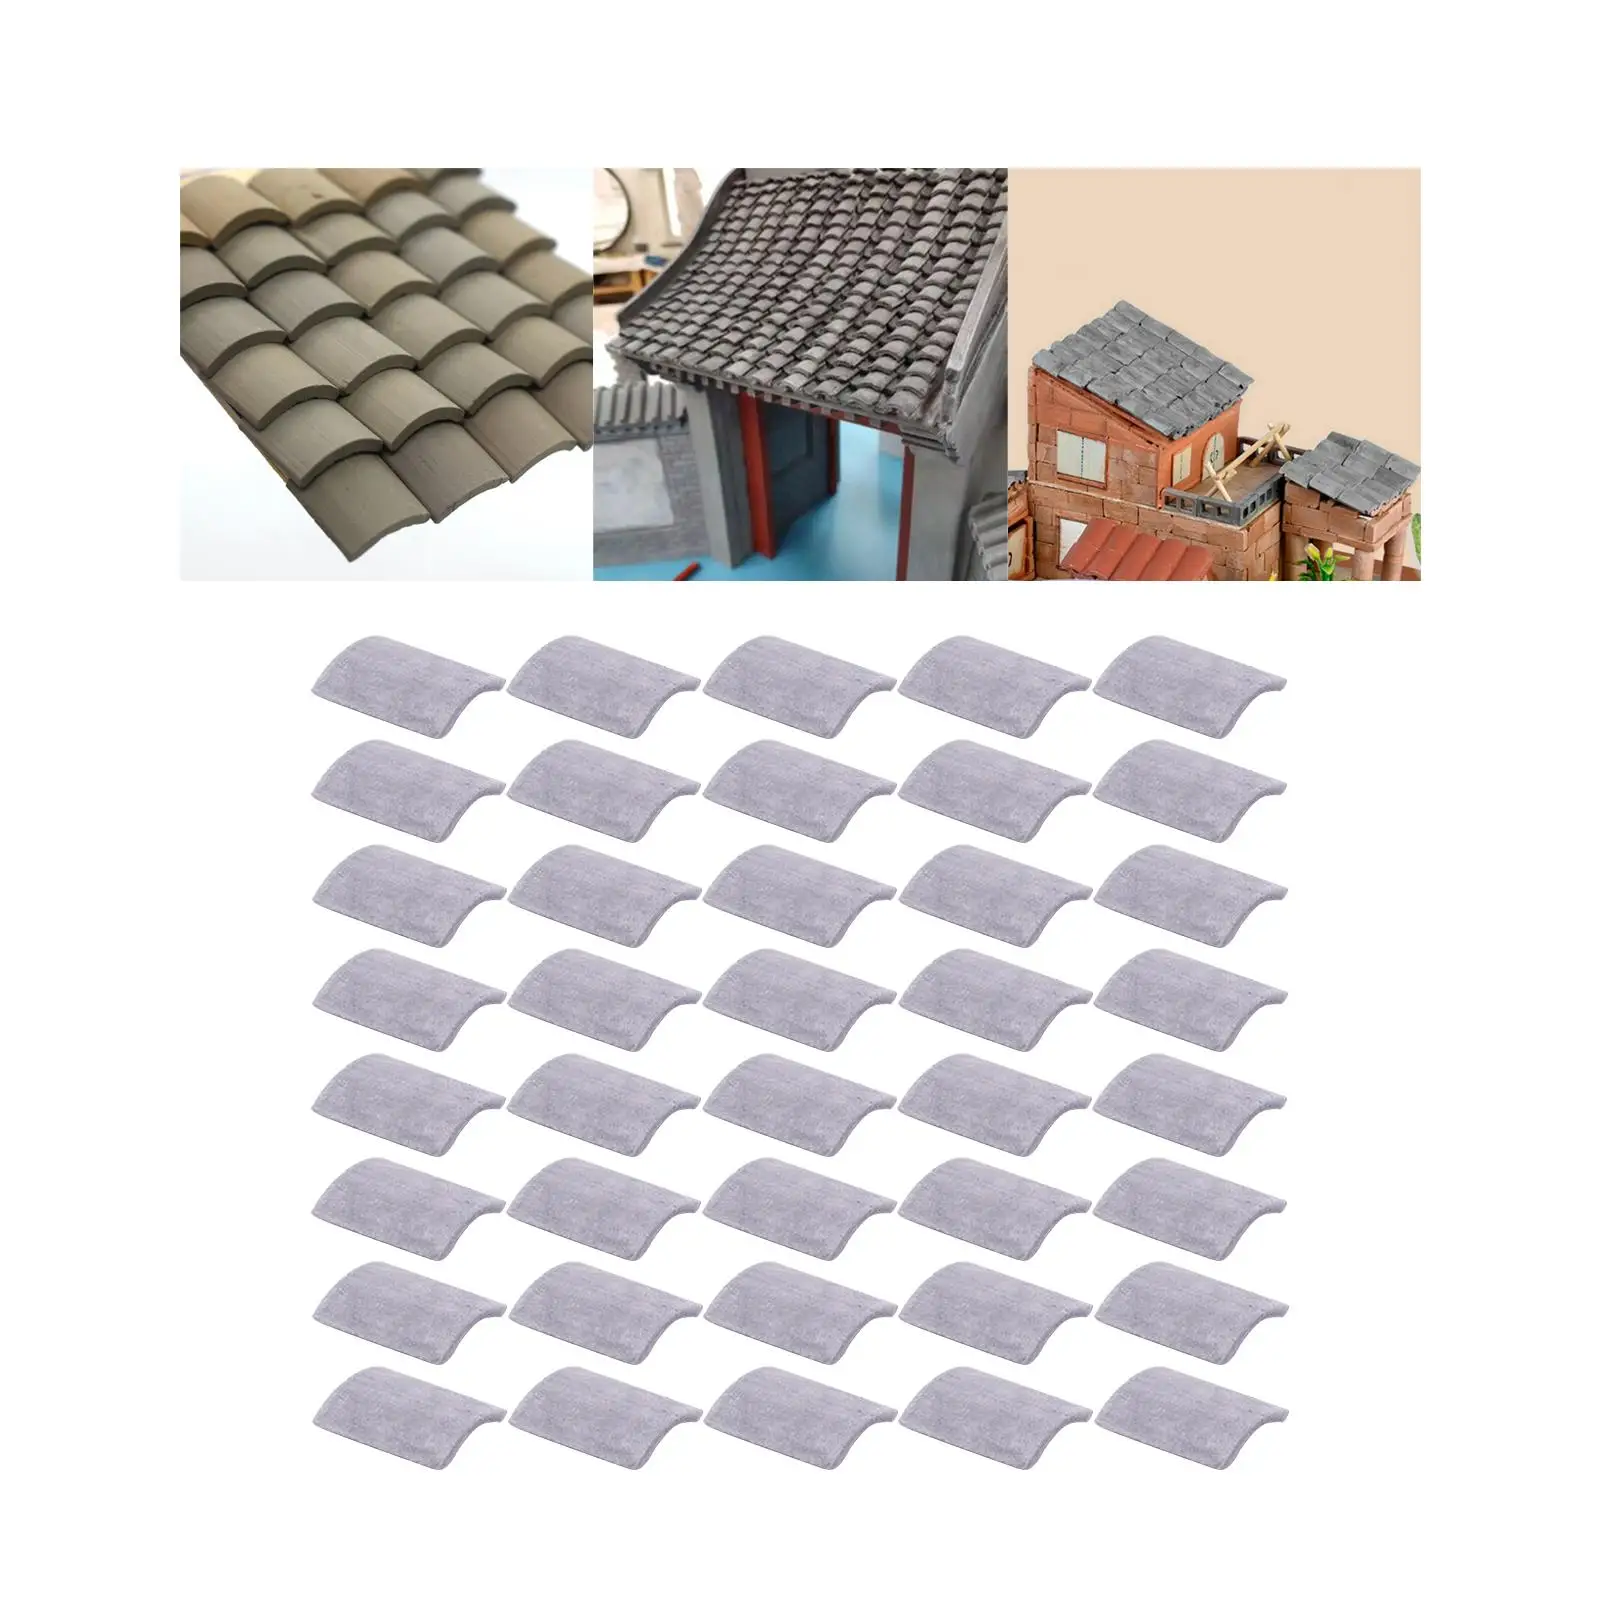 Grey Roof Tiles 1:16 Decor Miniature Tiles Figurine Landscaping Accessories for Dollhouses Life Scene Props Toys DIY Fitments